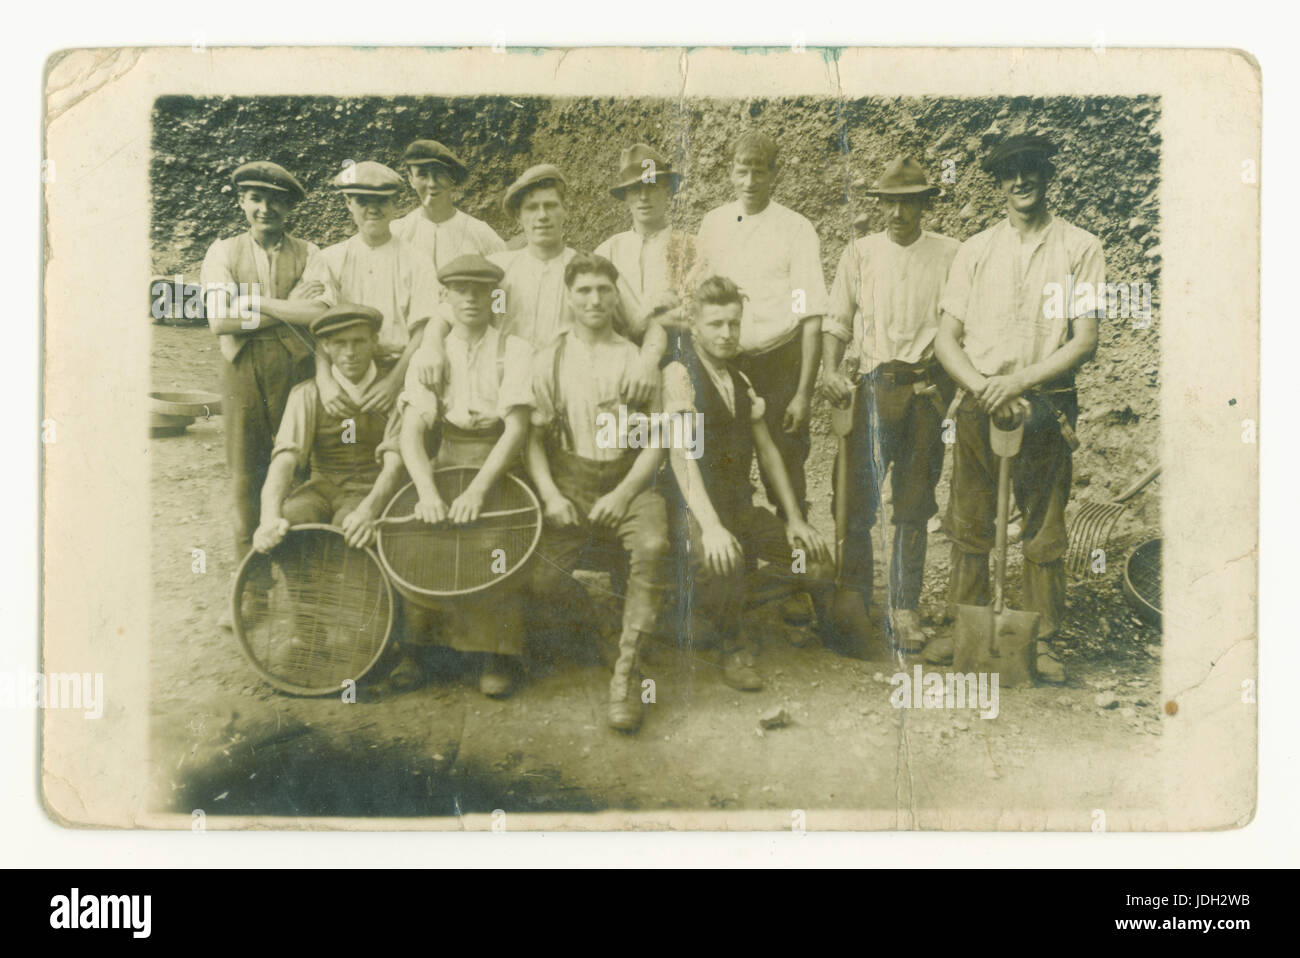 Early 1900's Edwardian historical postcard photo of young men working in a quarry holding sieves possibly used for screening aggregates into the required sizes, possibly for road building or construction, also with tools and shovels, circa 1905, UK Stock Photo